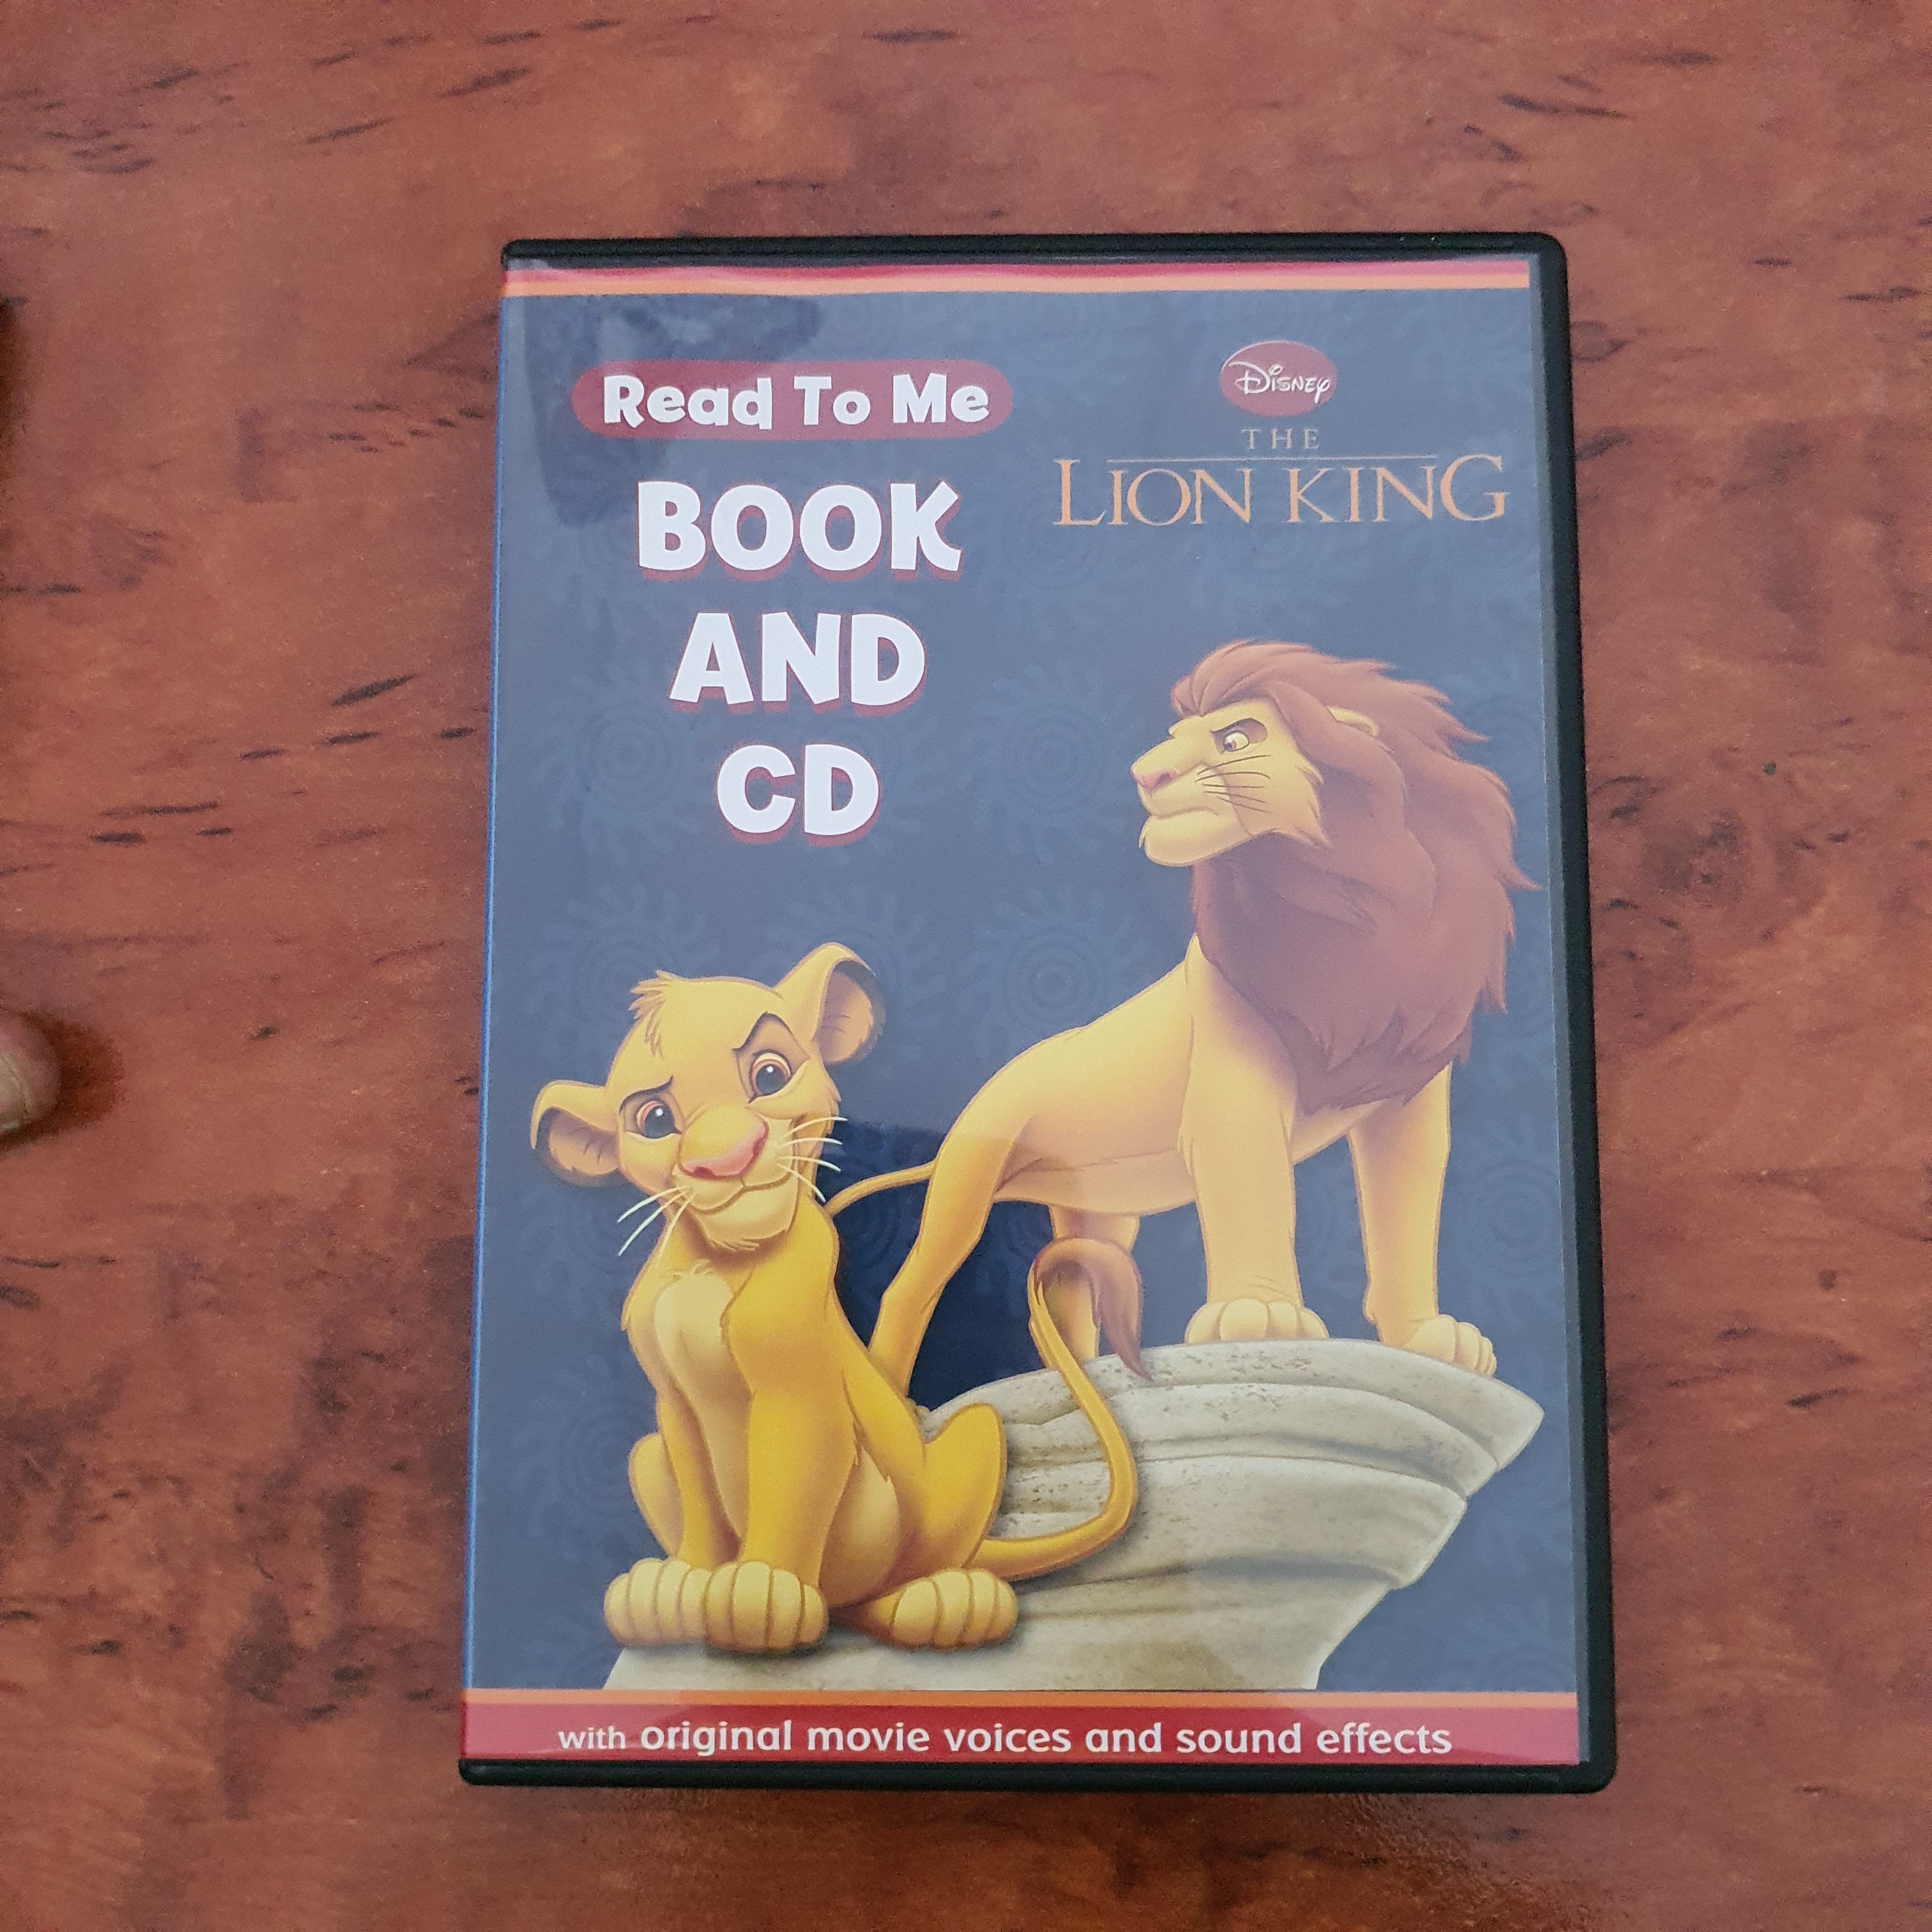 THE LION KING read to me